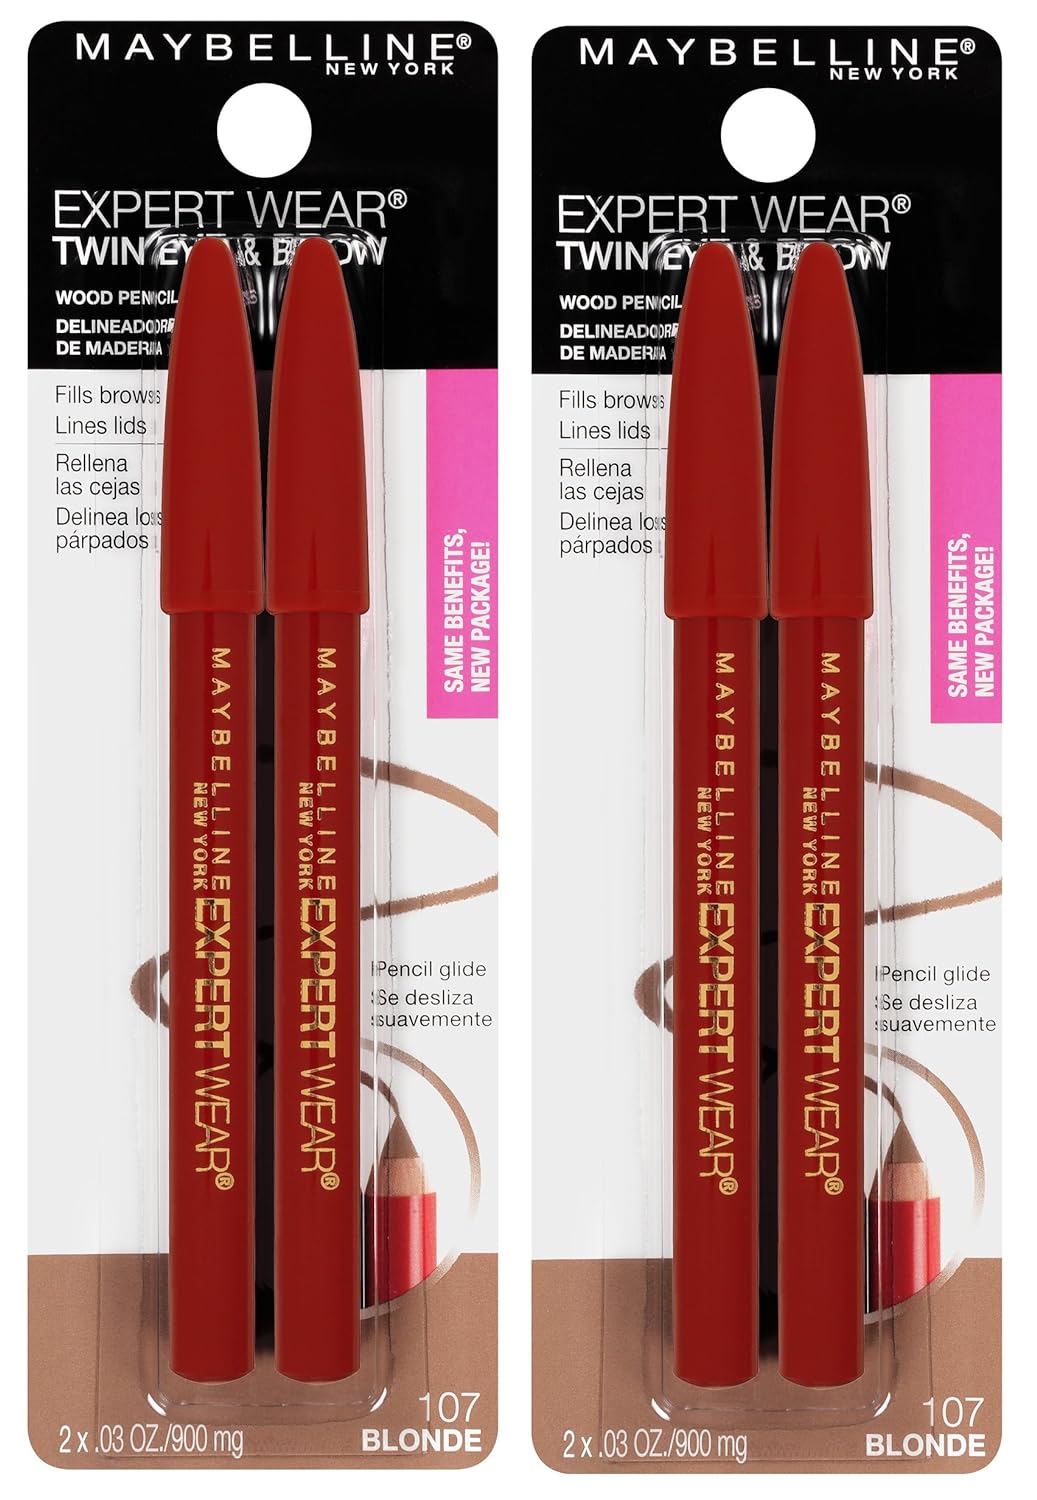 Maybelline New York Expert Wear Twin Brow & Eye Pencils Makeup, Blonde, 2 Count (Pack of 2)